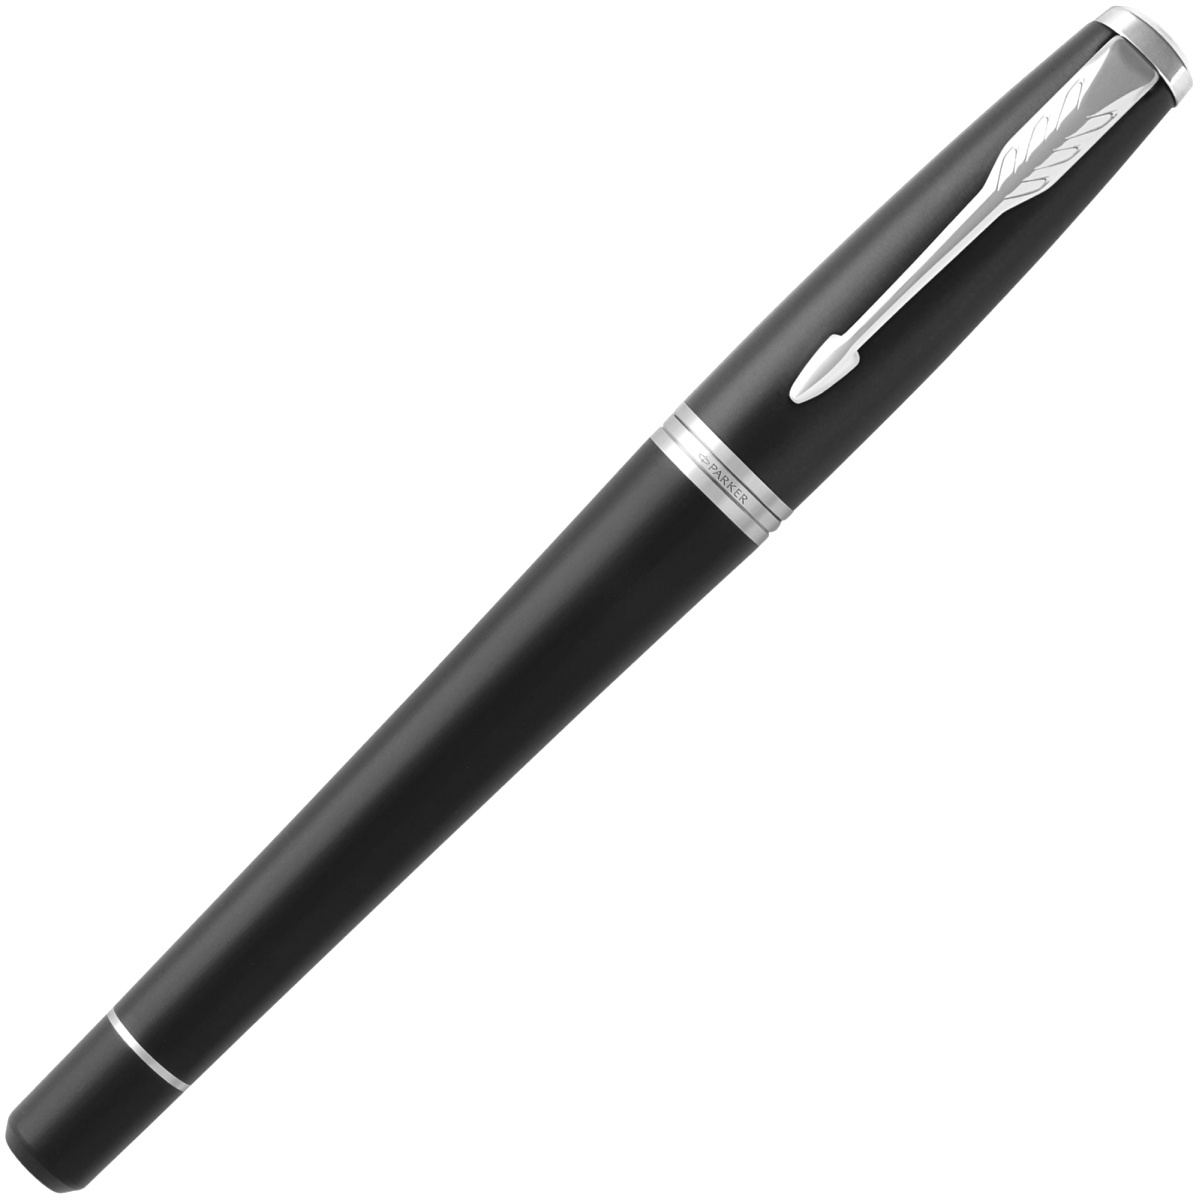  Ручка-роллер Parker Urban Core T309, Muted Black CT, фото 2